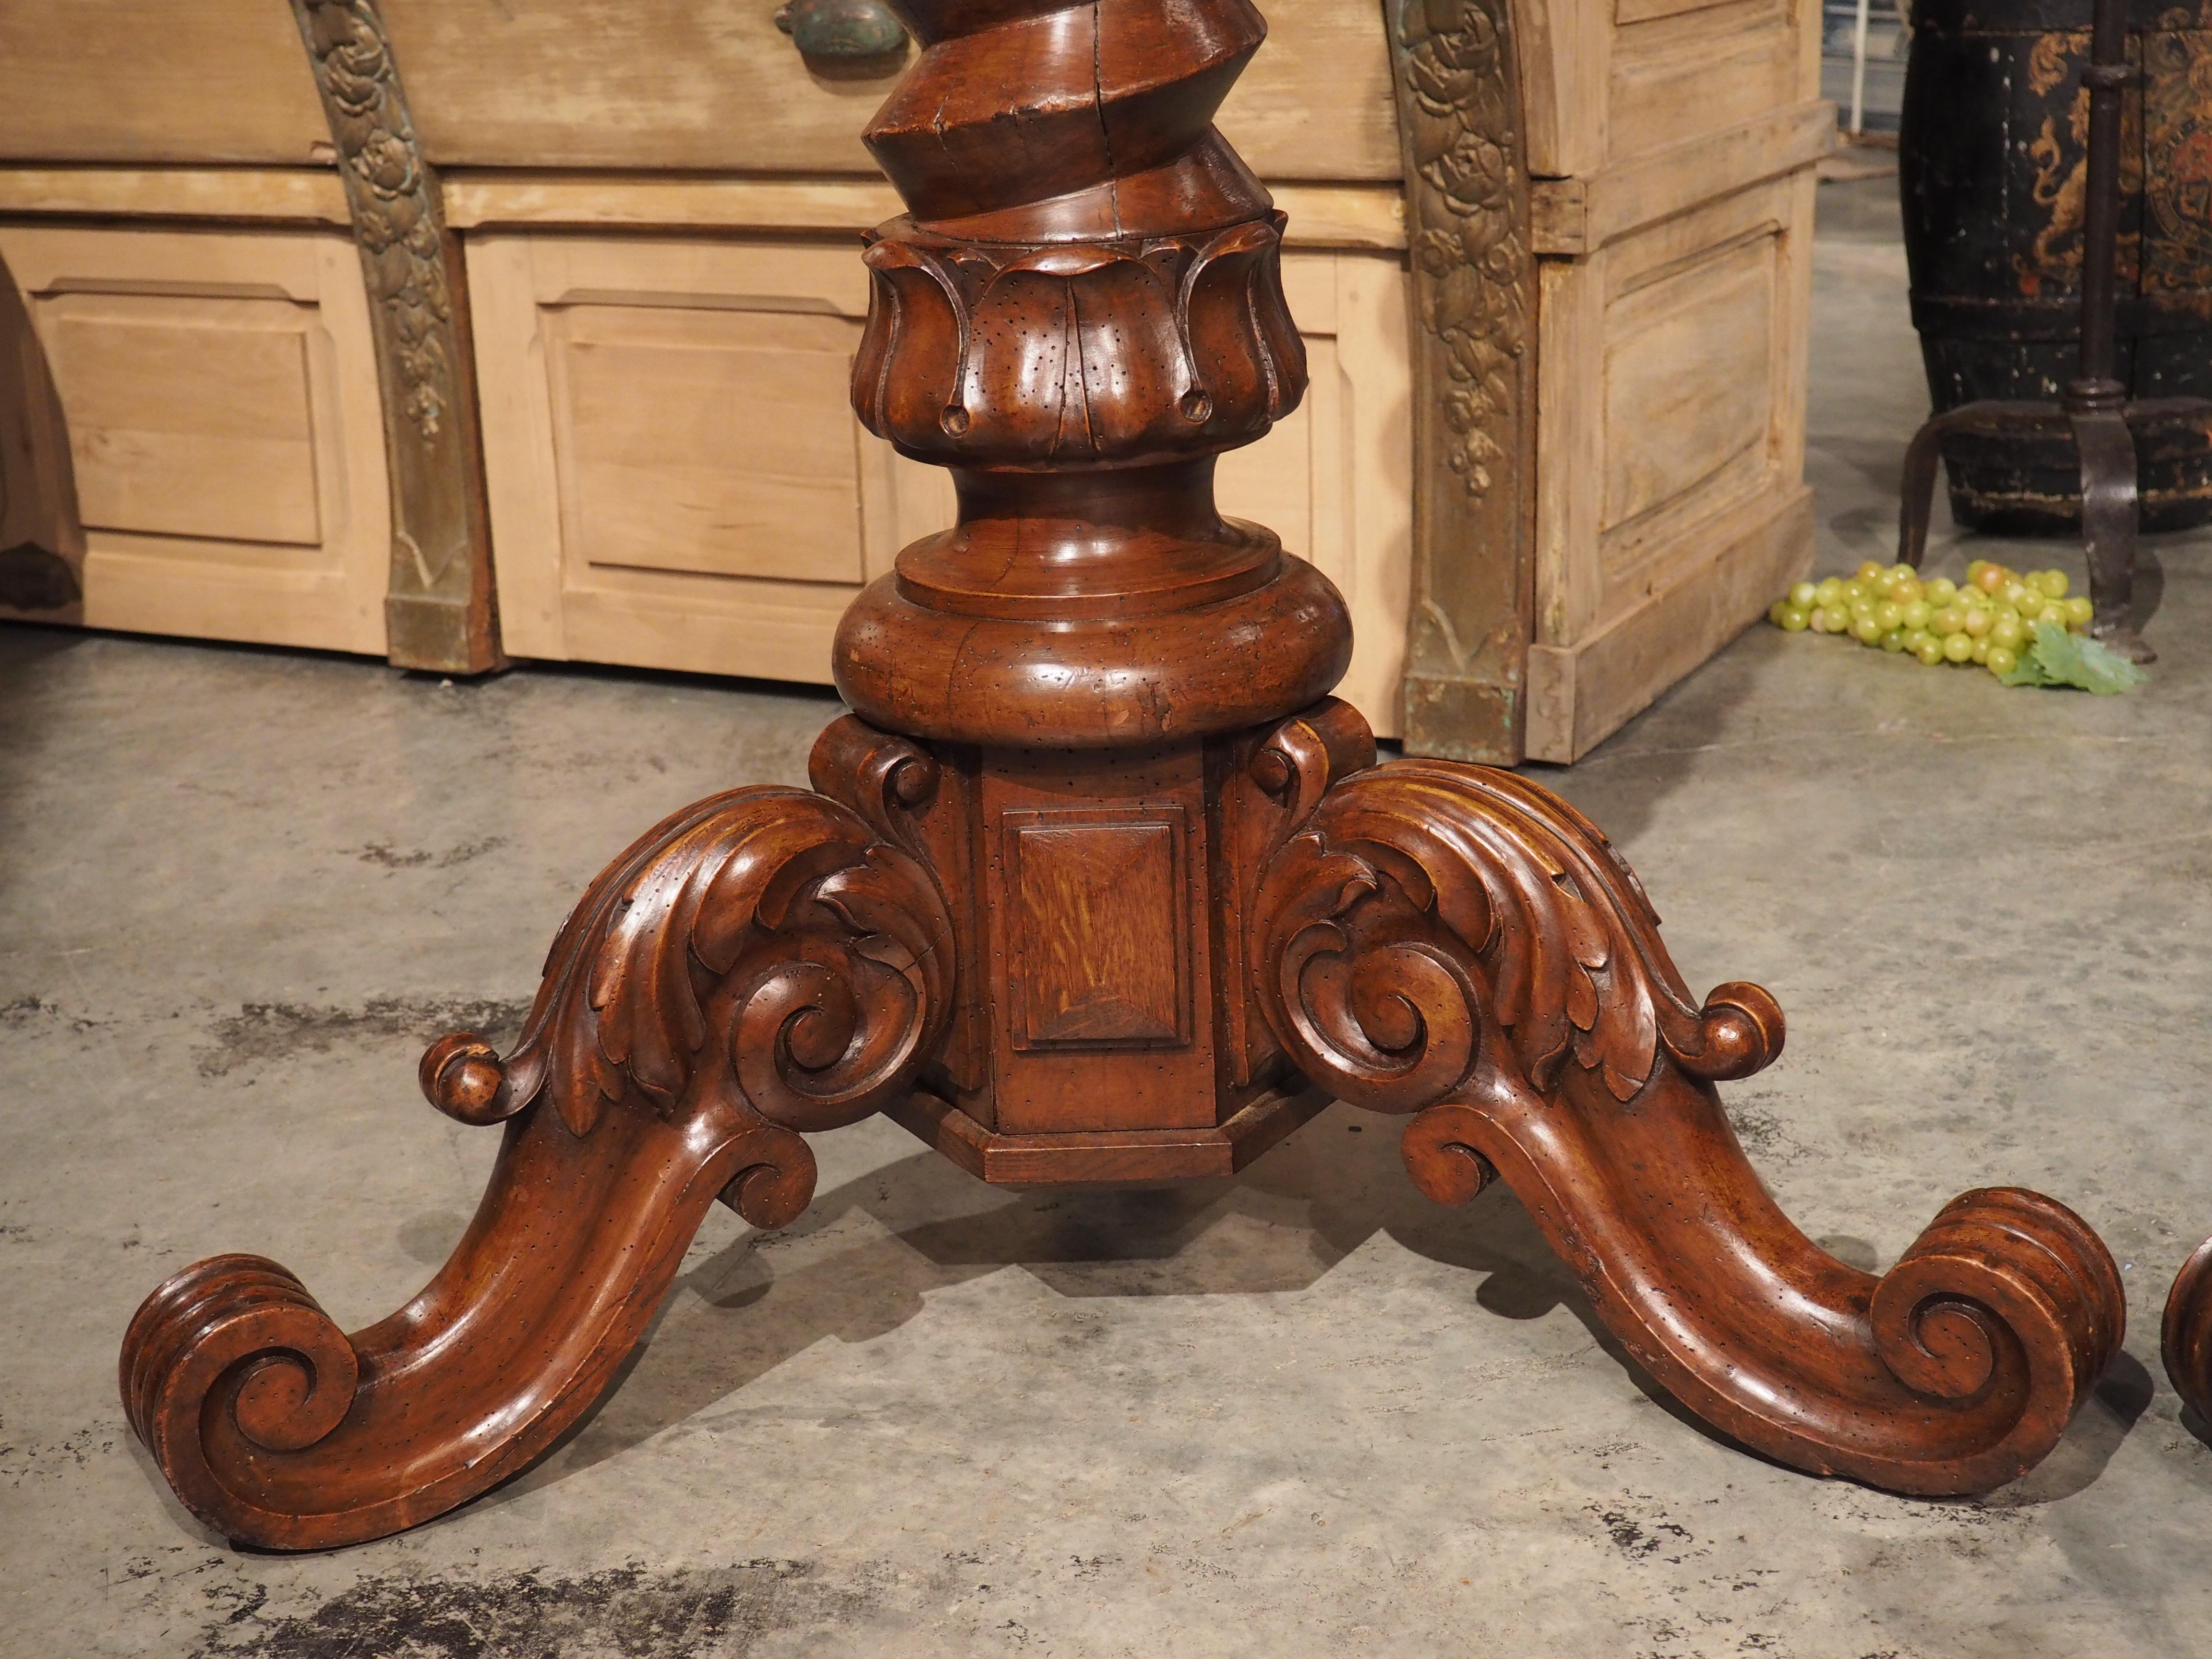 Rare Pair of Antique Wine Press Screw Sellettes in Carved Walnut, circa 1850 For Sale 9